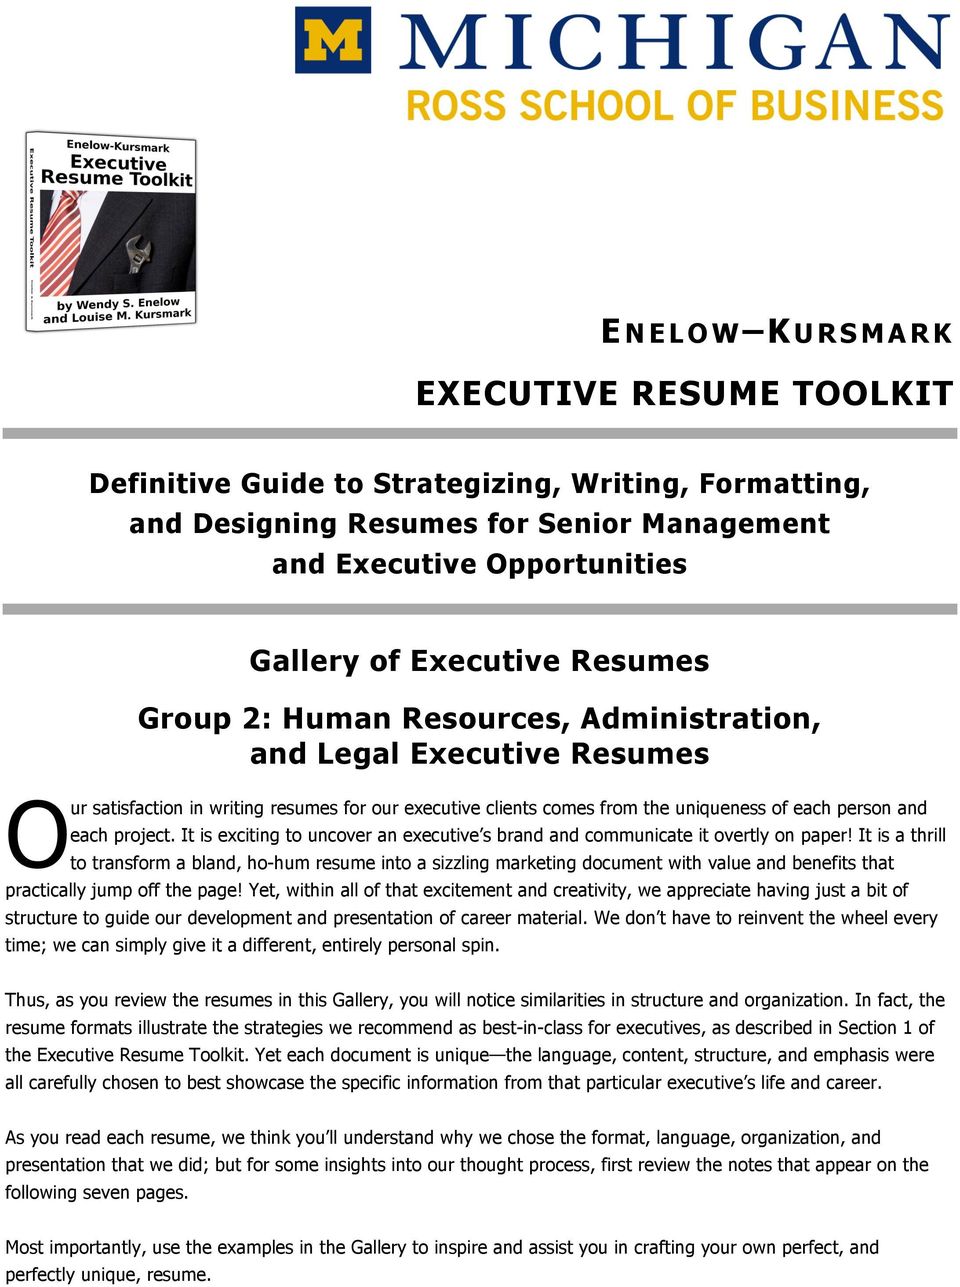 E N E L O W KURSMARK EXECUTIVE RESUME TOOLKIT - PDF Free Download With Ross School Of Business Resume Template